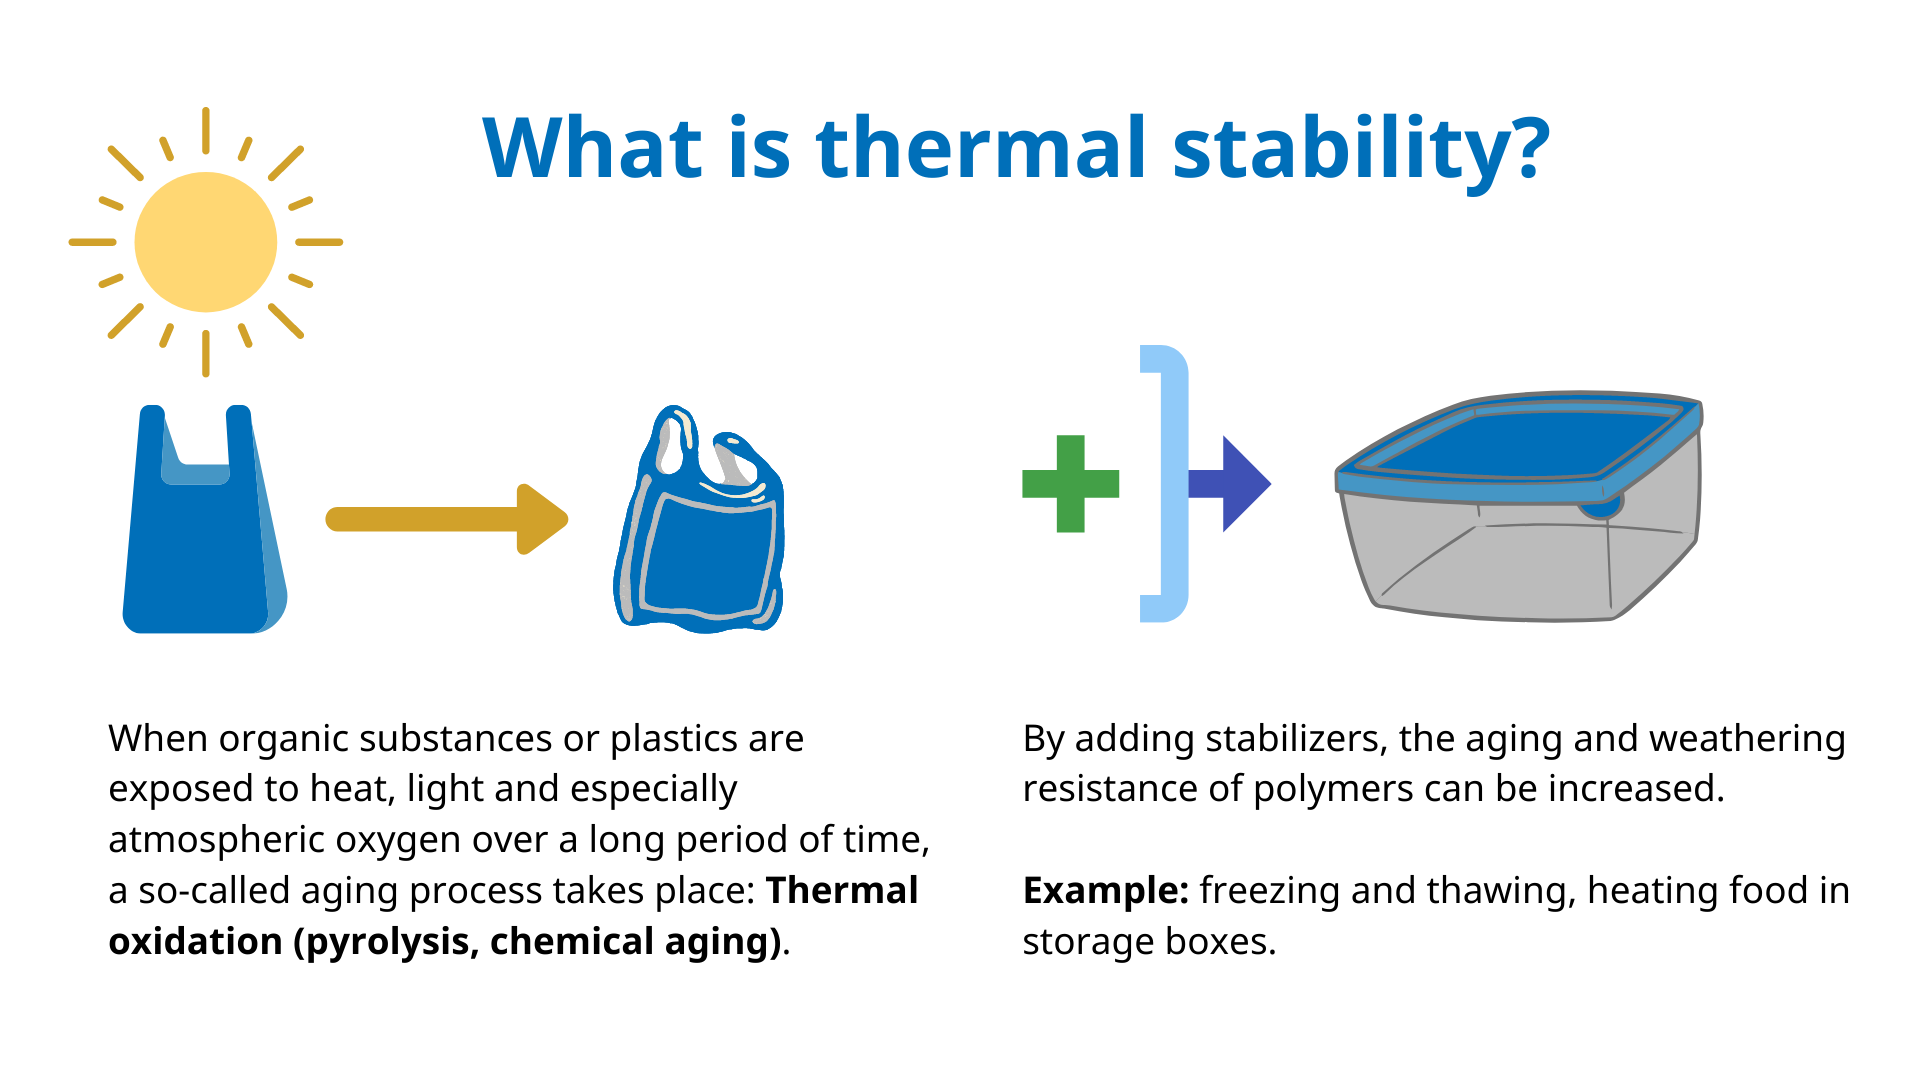 Thermal stability